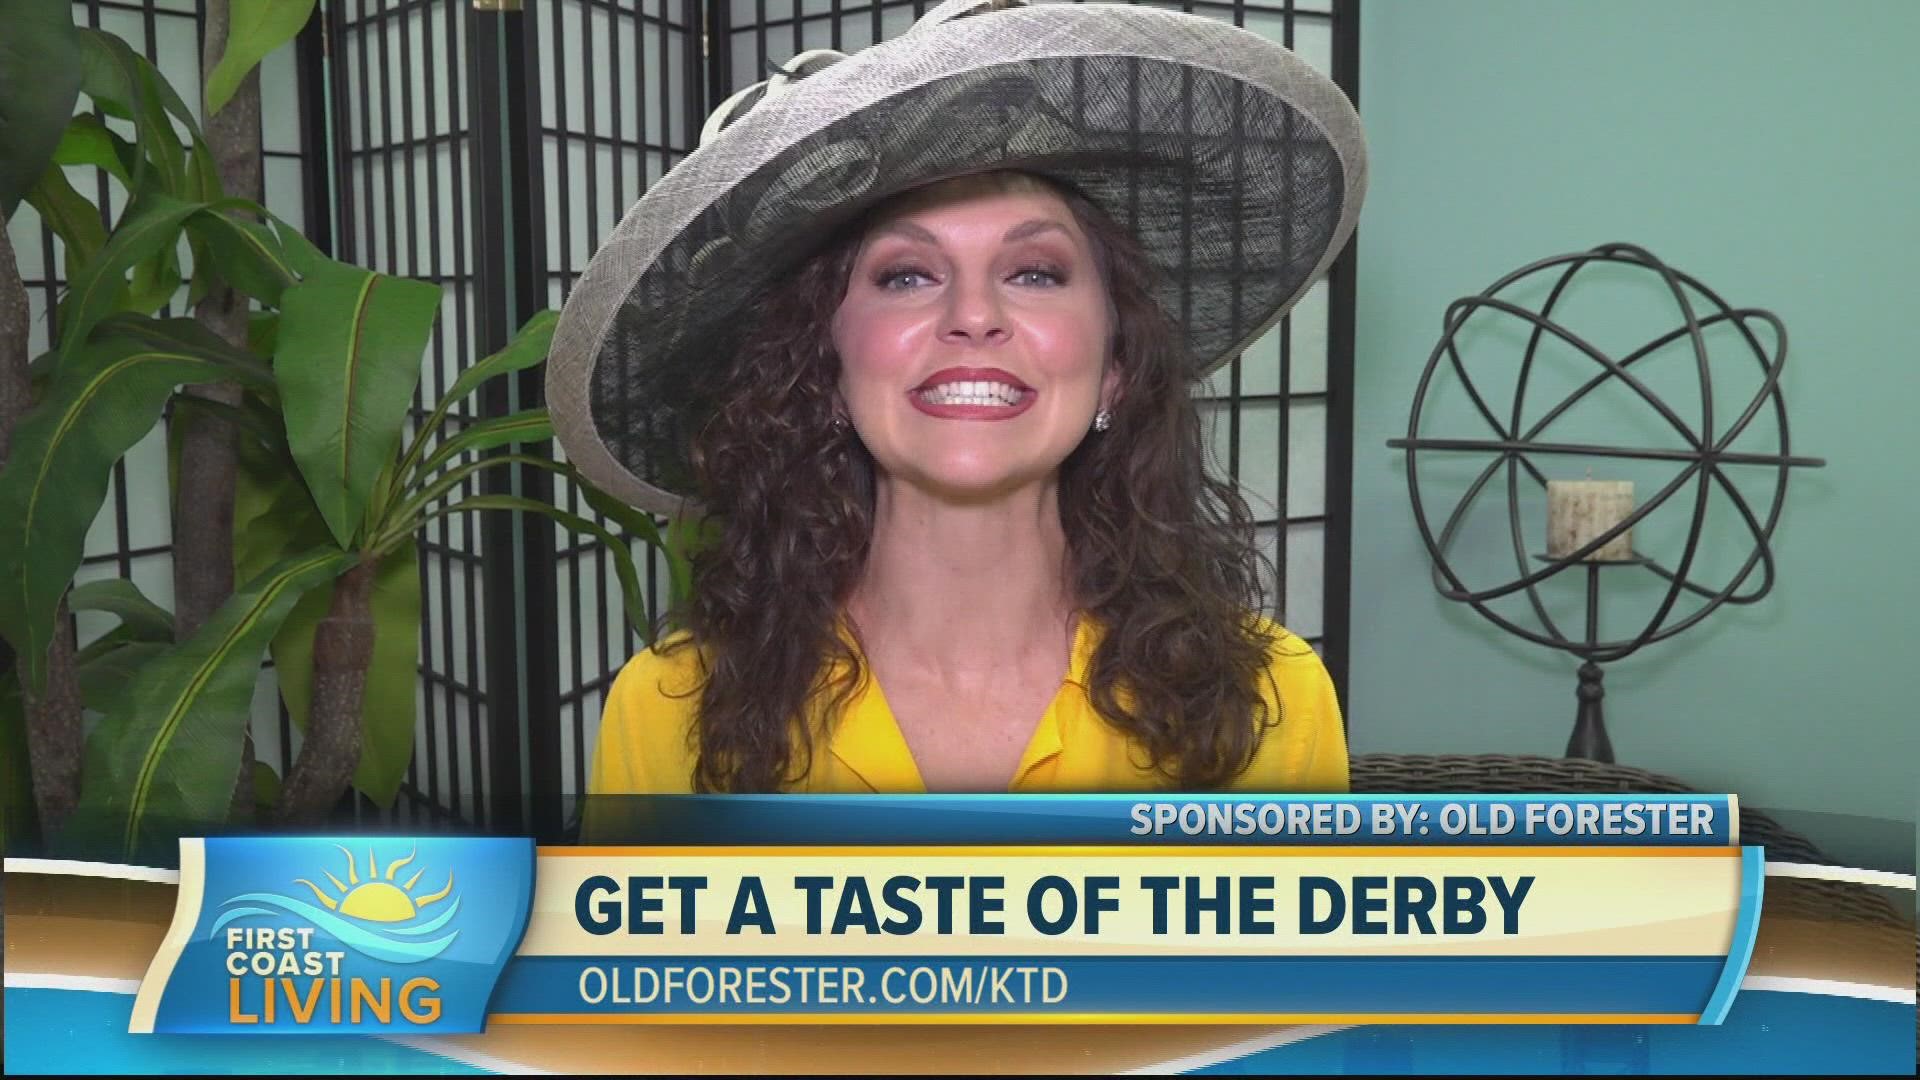 Old Forester Master Taster, Jackie Zykan brings the taste of the derby to your living room with the official drink of the derby the Old Forester mint julep.